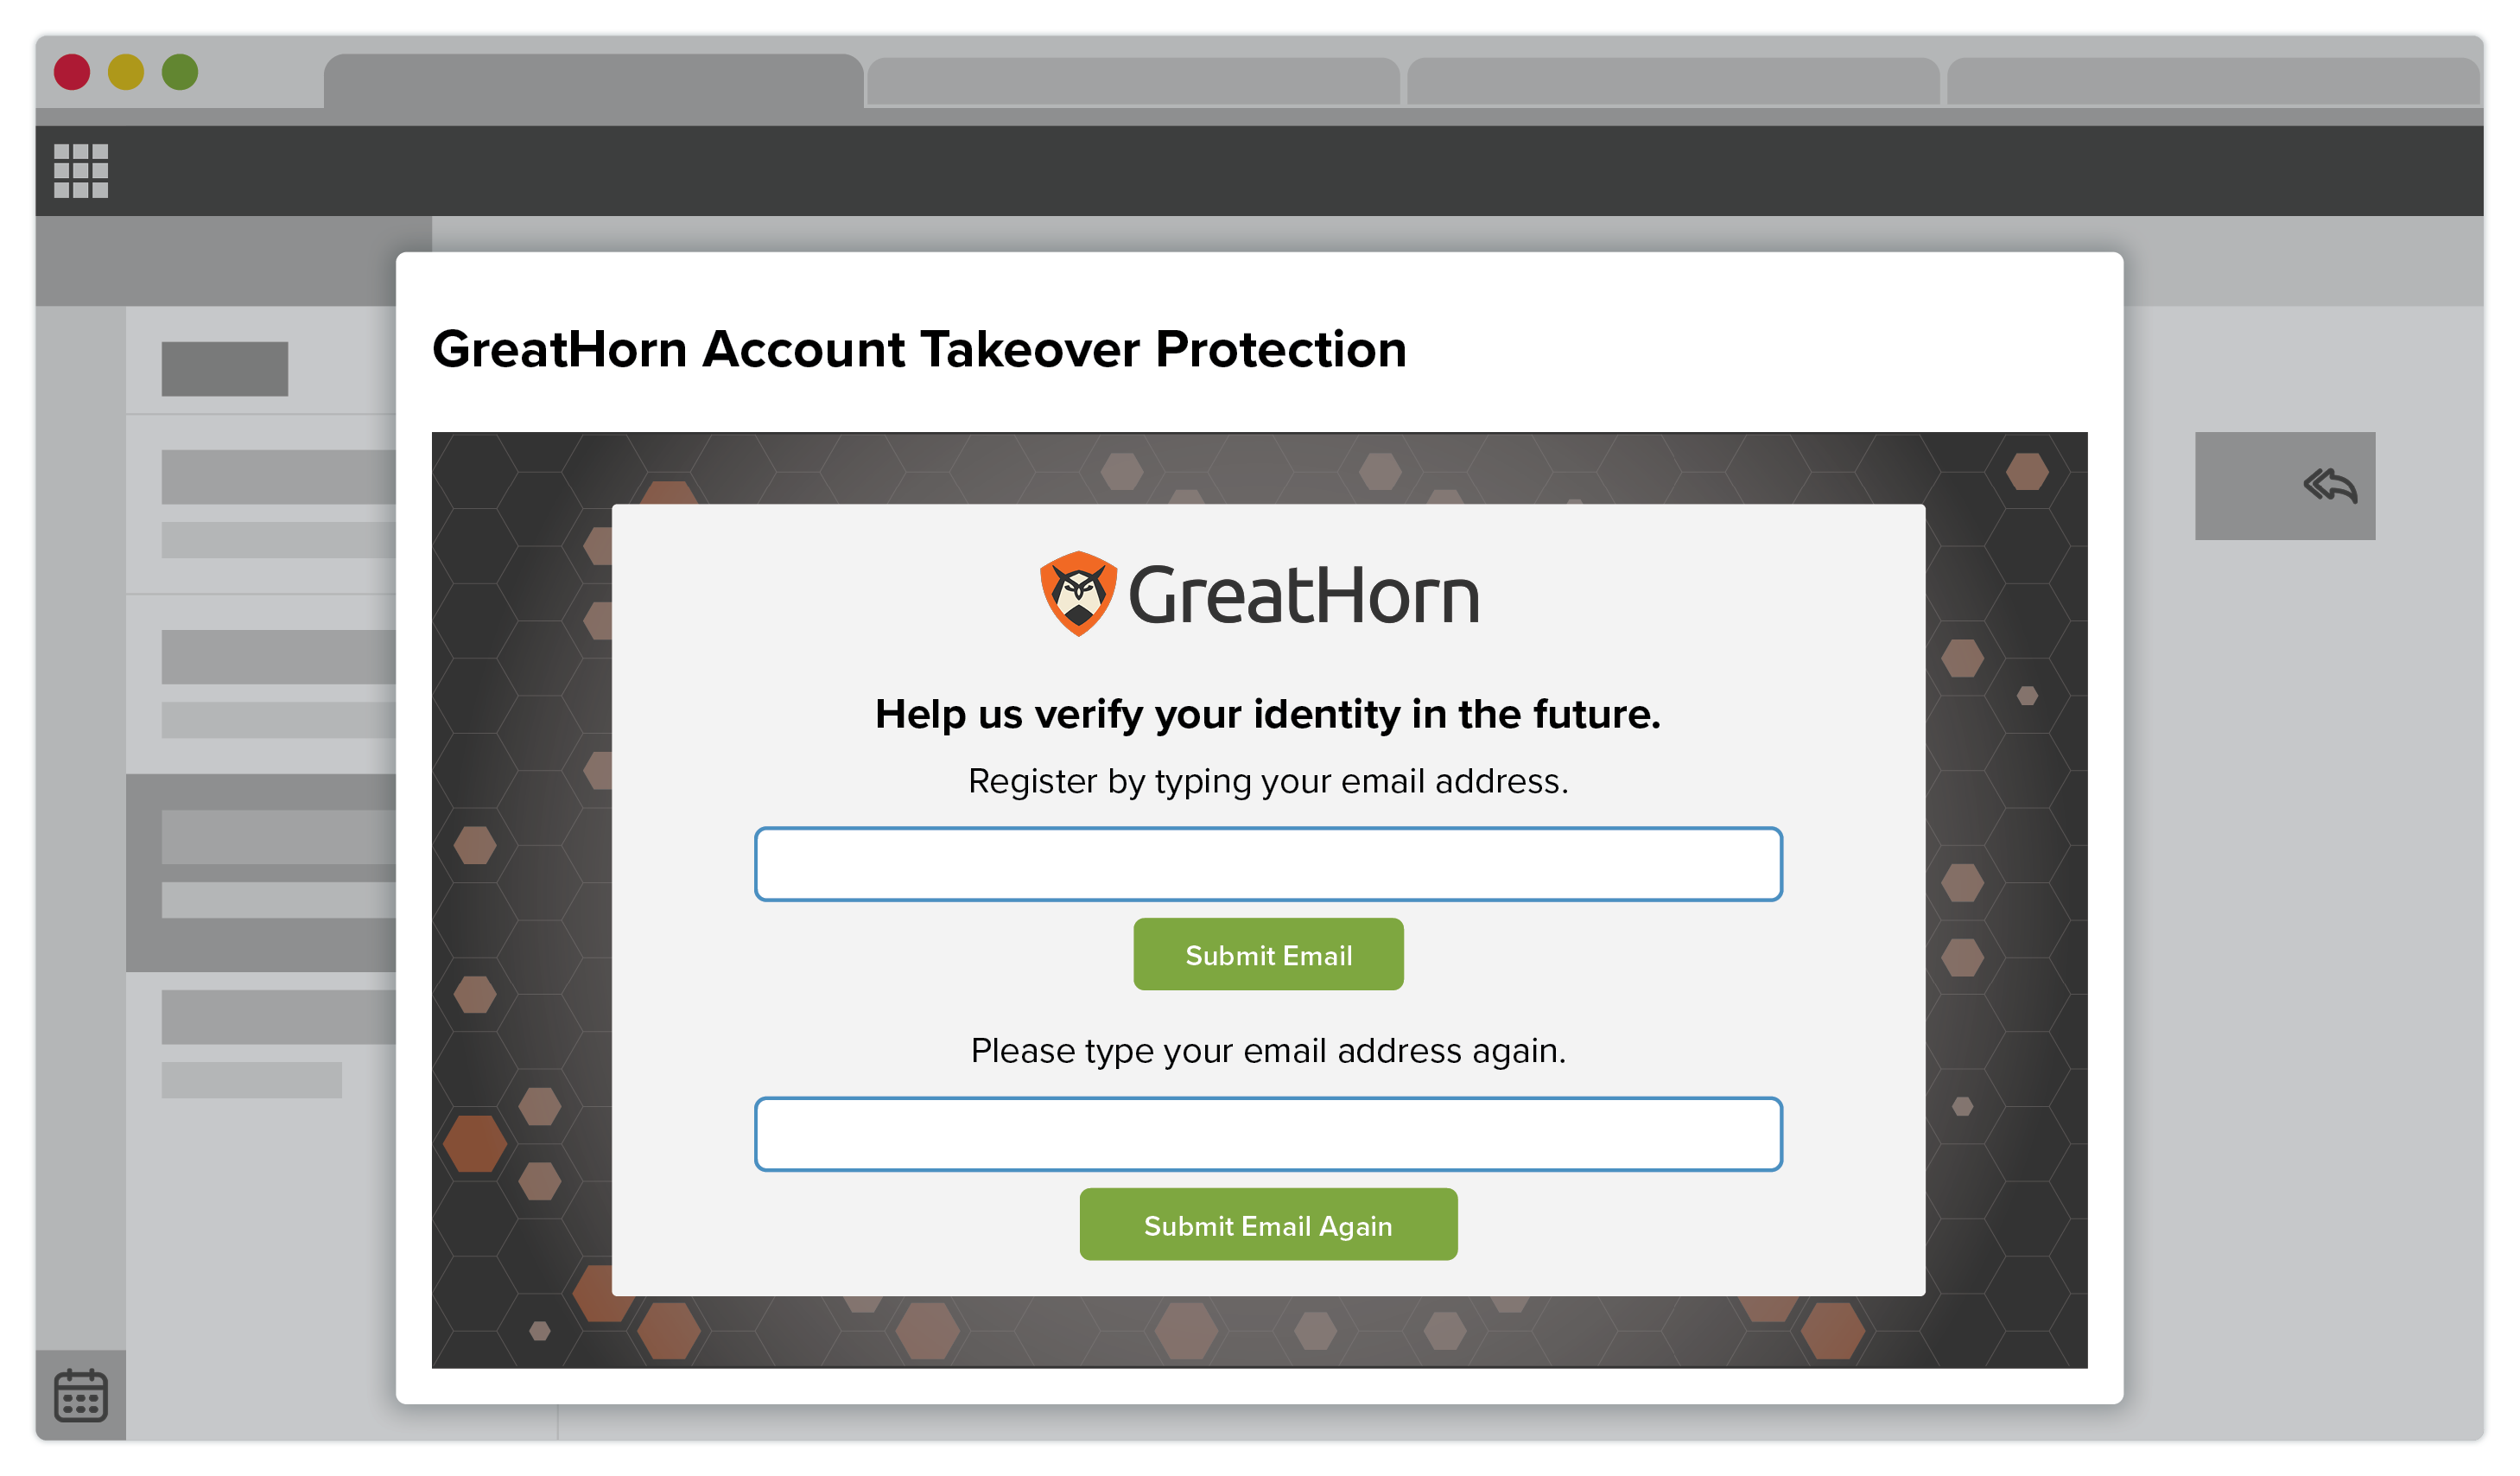 Account Takeover Verification screen